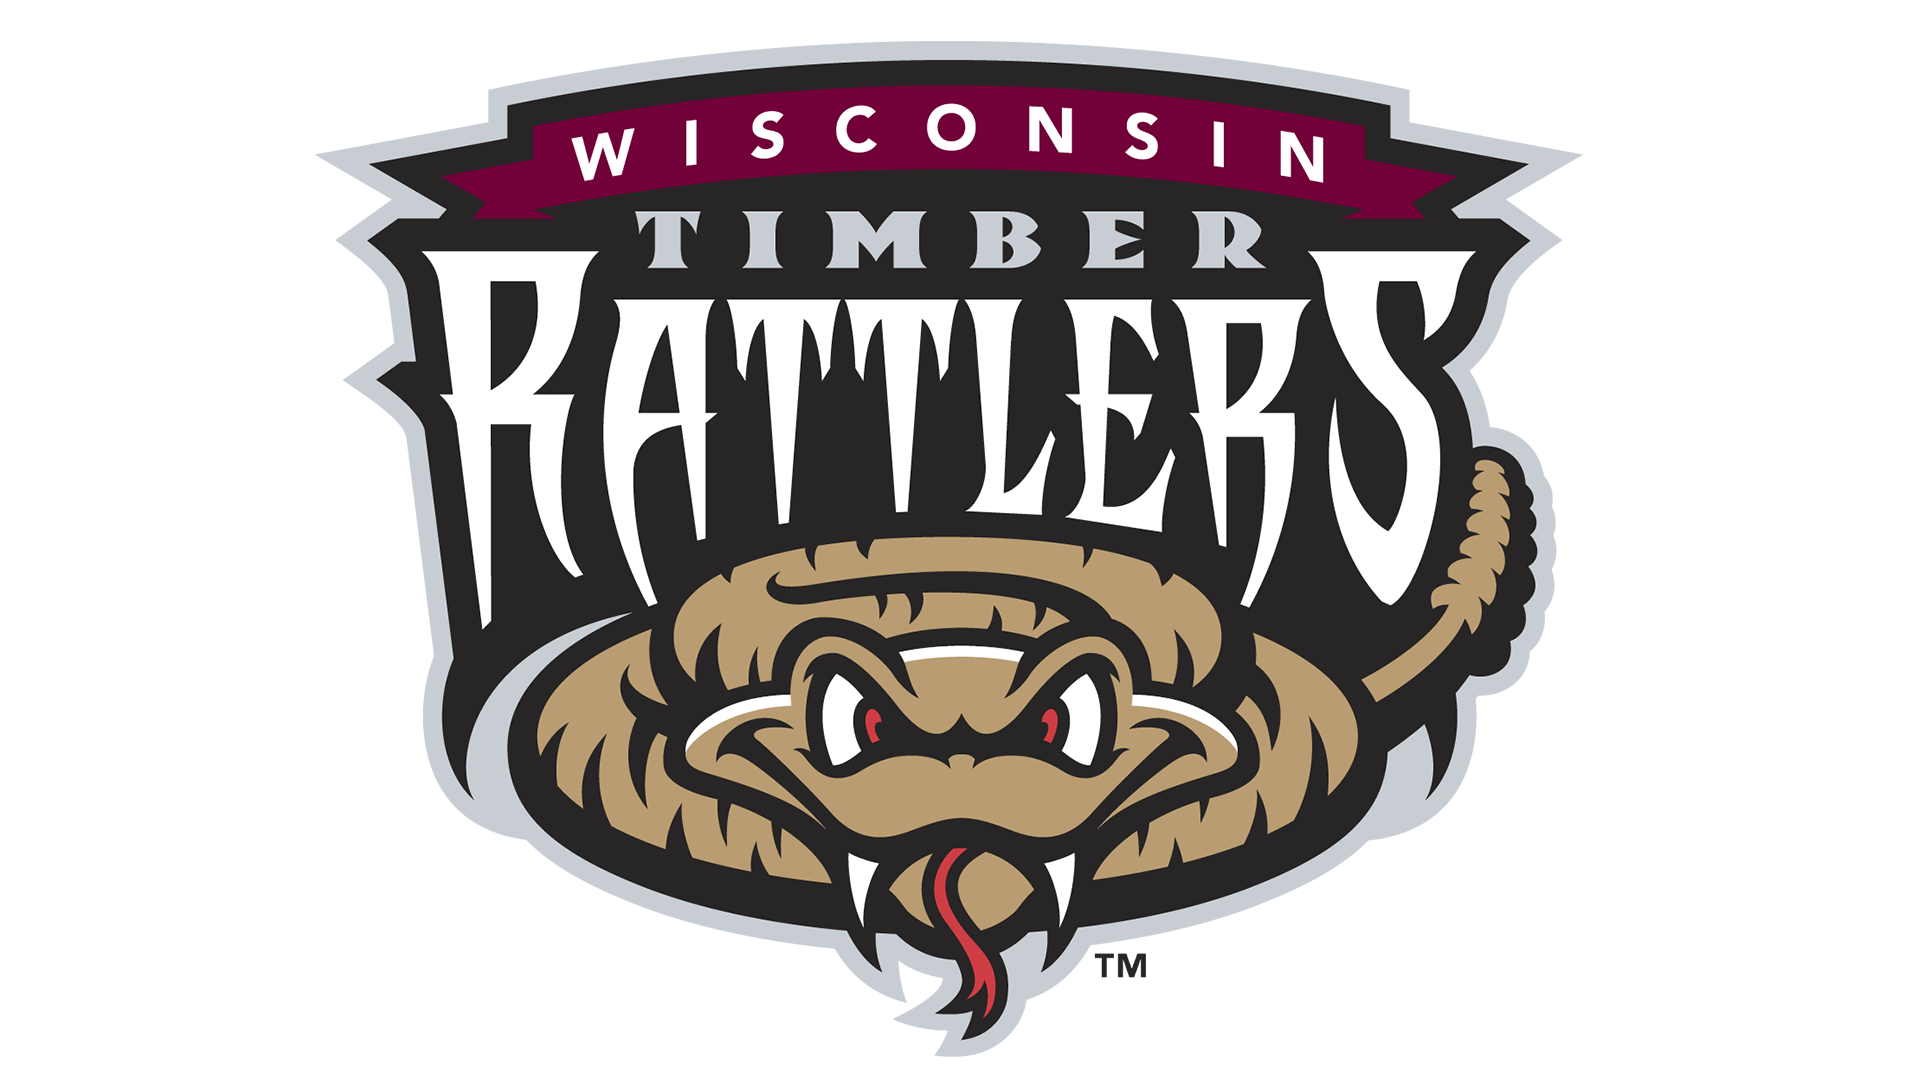 Rattlers Logo - Wisconsin Timber Rattlers logo, symbol, meaning, History and Evolution